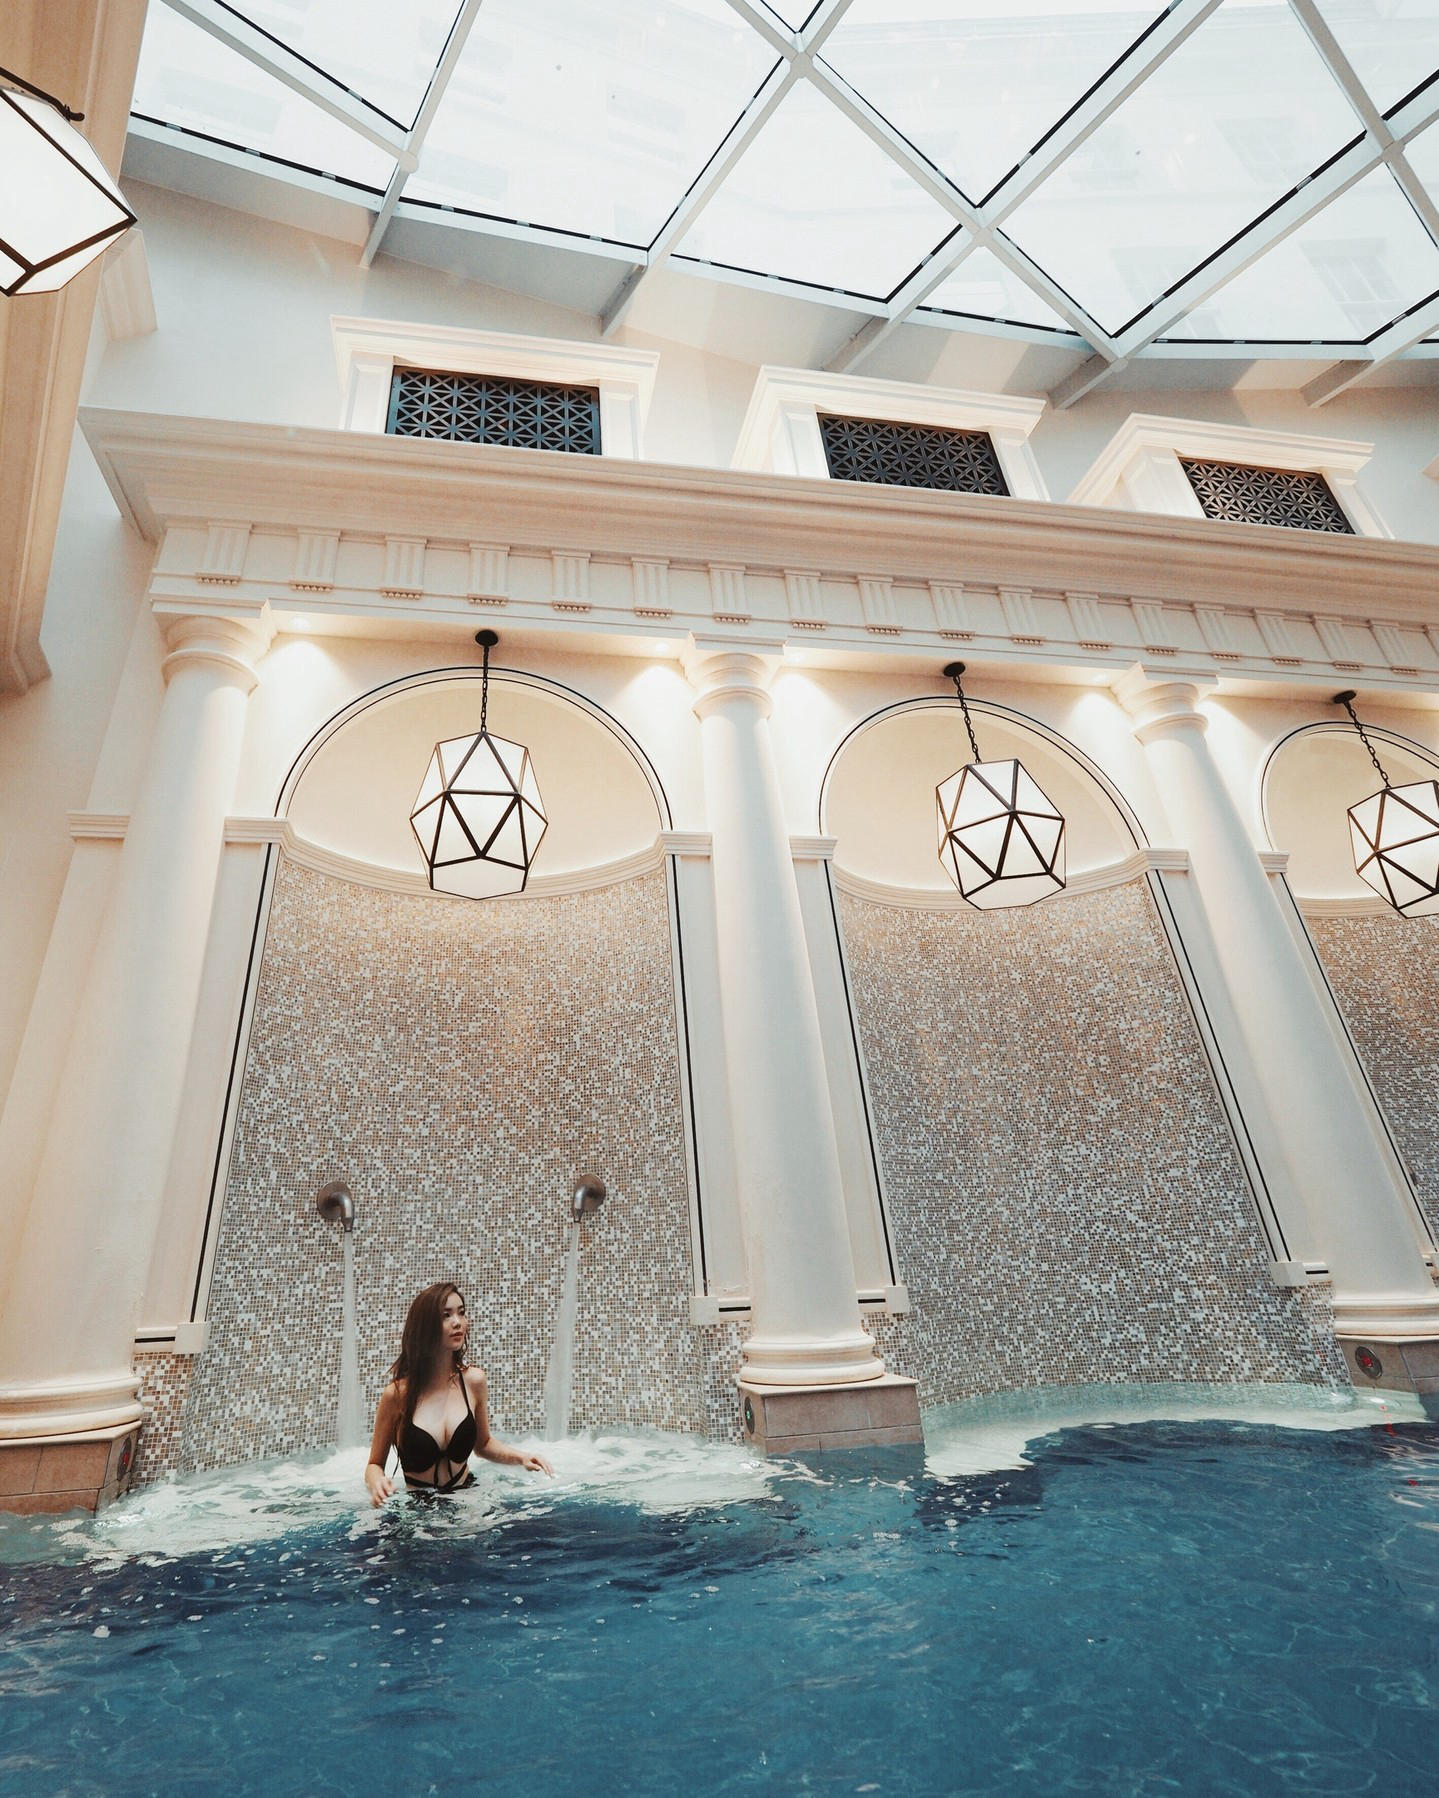 Spend the day relaxing in the healing waters of #SpaVillage Bath, truly the perfect way to unwind af